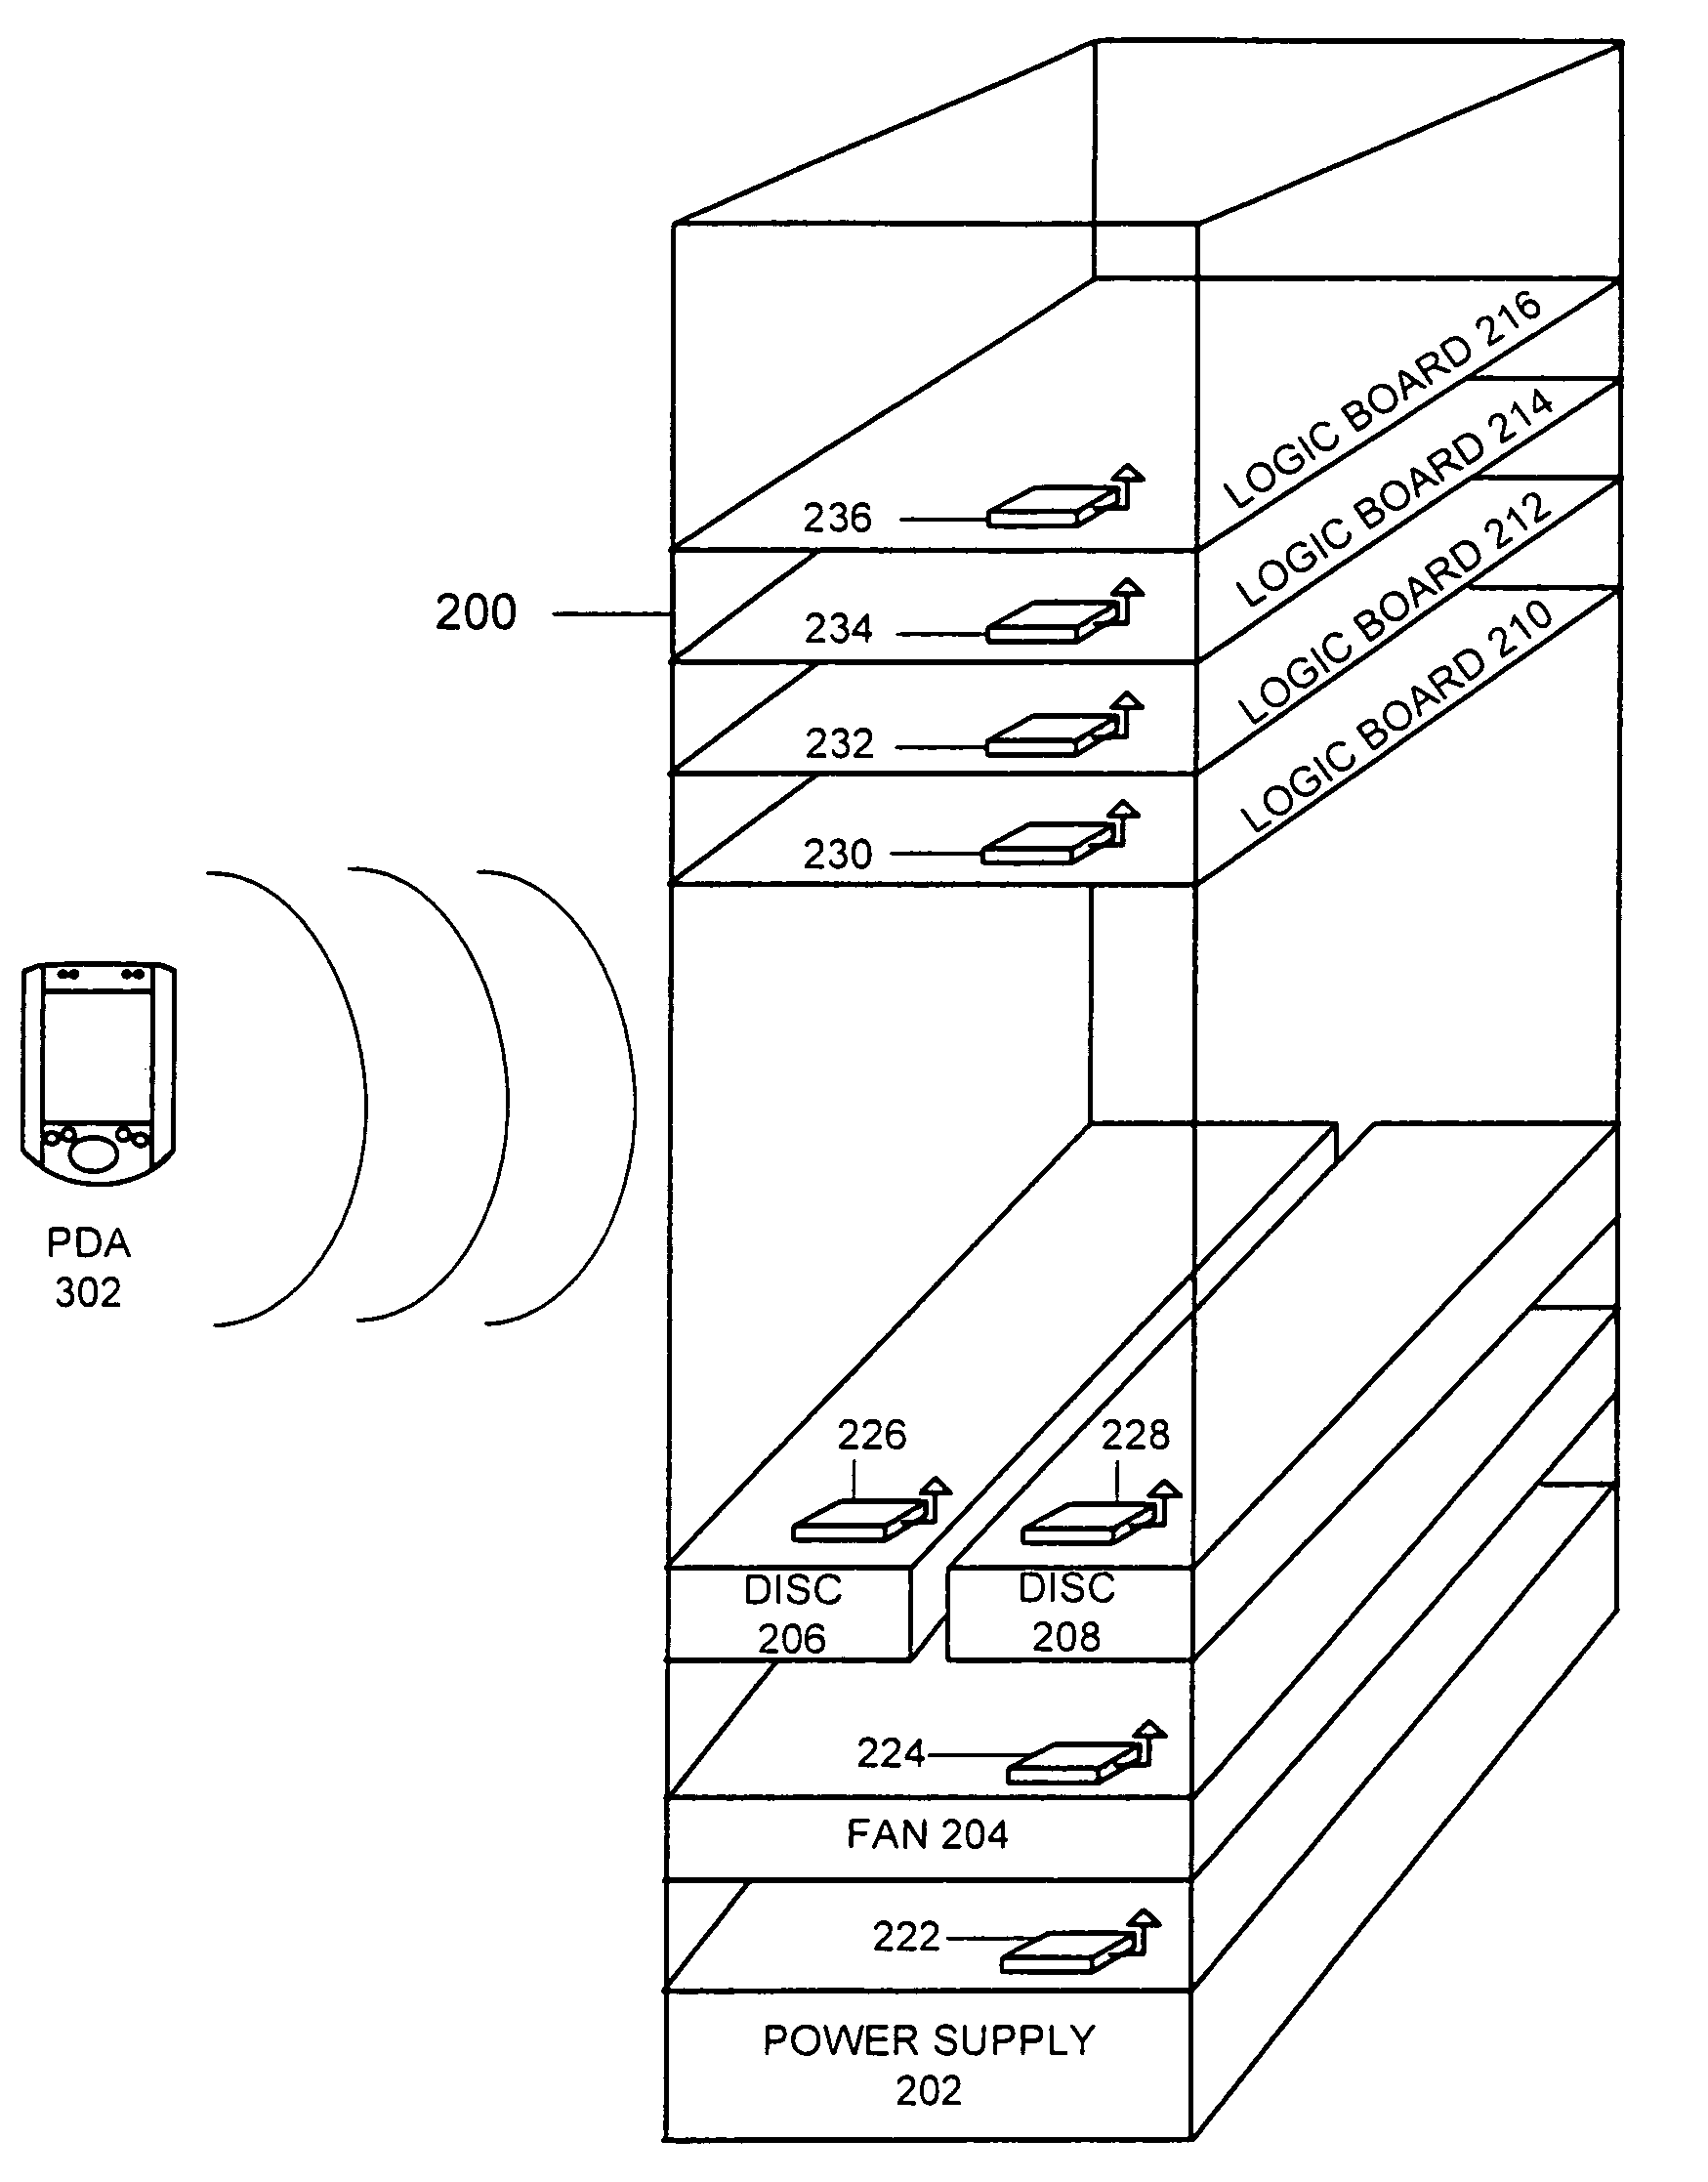 Method and apparatus for wirelessly testing field-replaceable units (FRUs)